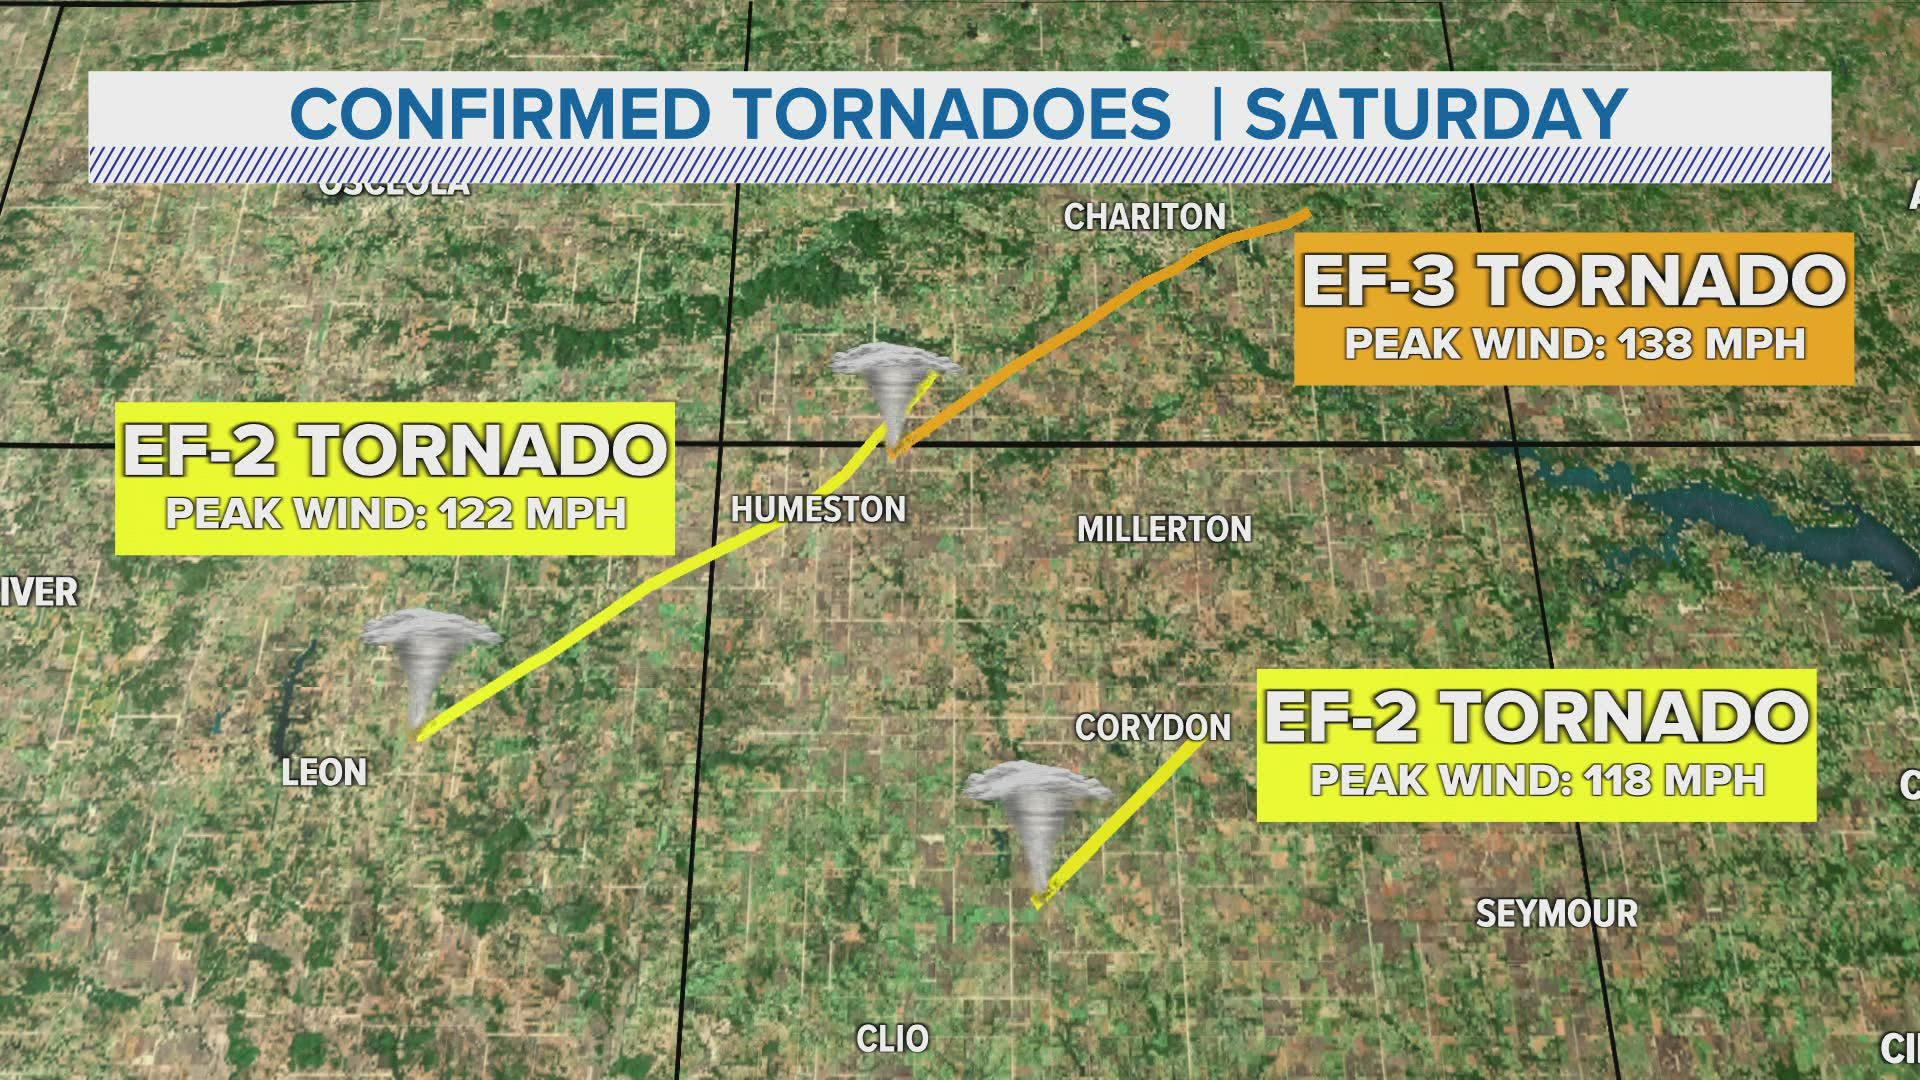 The National Weather Service has confirmed three tornadoes in central Iowa as of Sunday night.